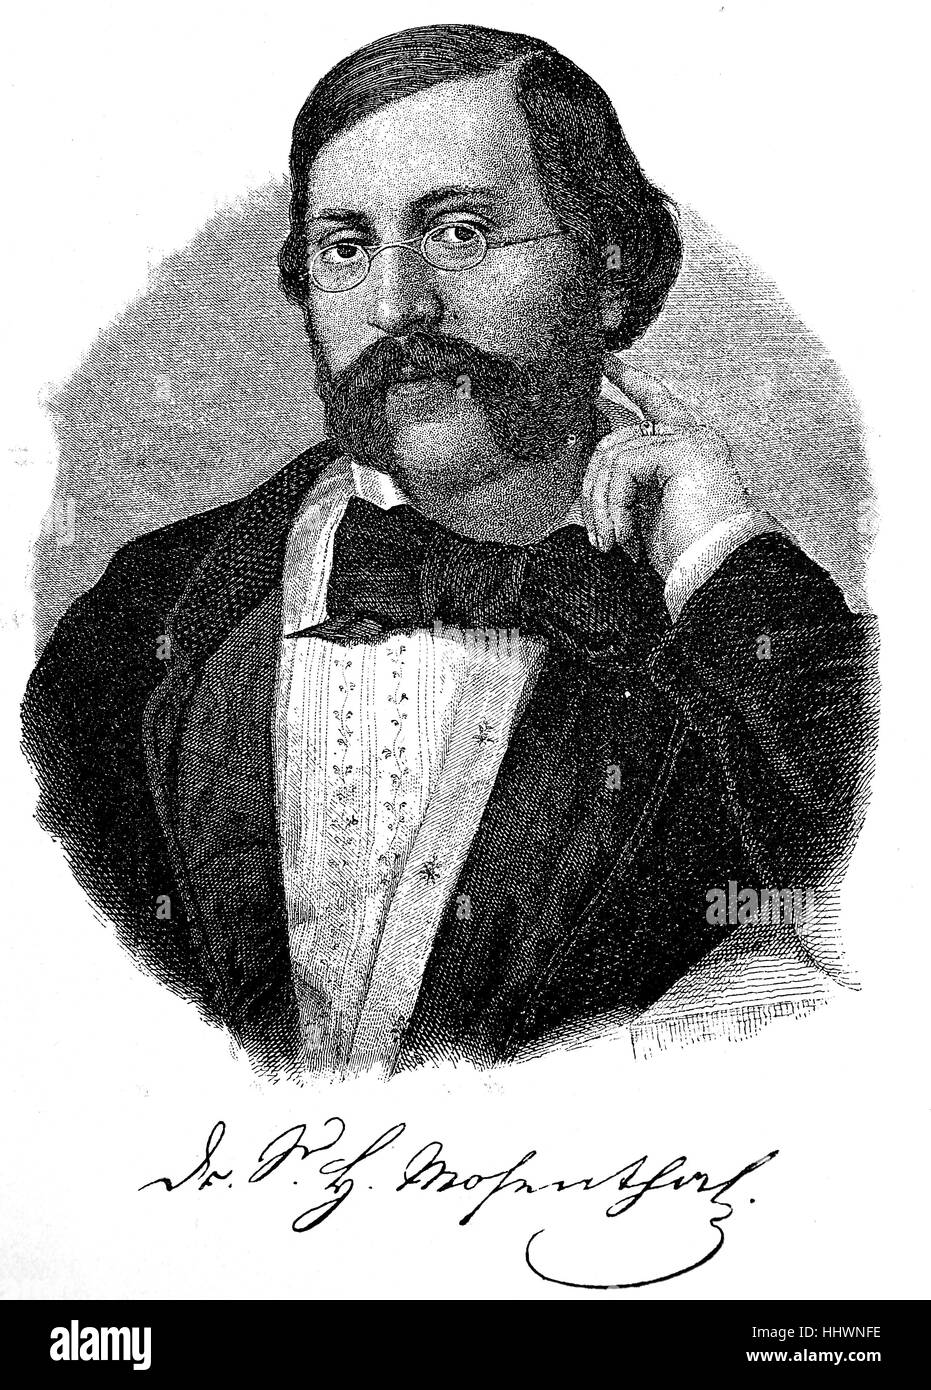 Salomon Hermann Mosenthal, 14 January 1821 in Kassel - 17 February 1877 in Vienna, was a writer, dramatist, and poet of German-Jewish, Germany, historical image or illustration, published 1890, digital improved Stock Photo